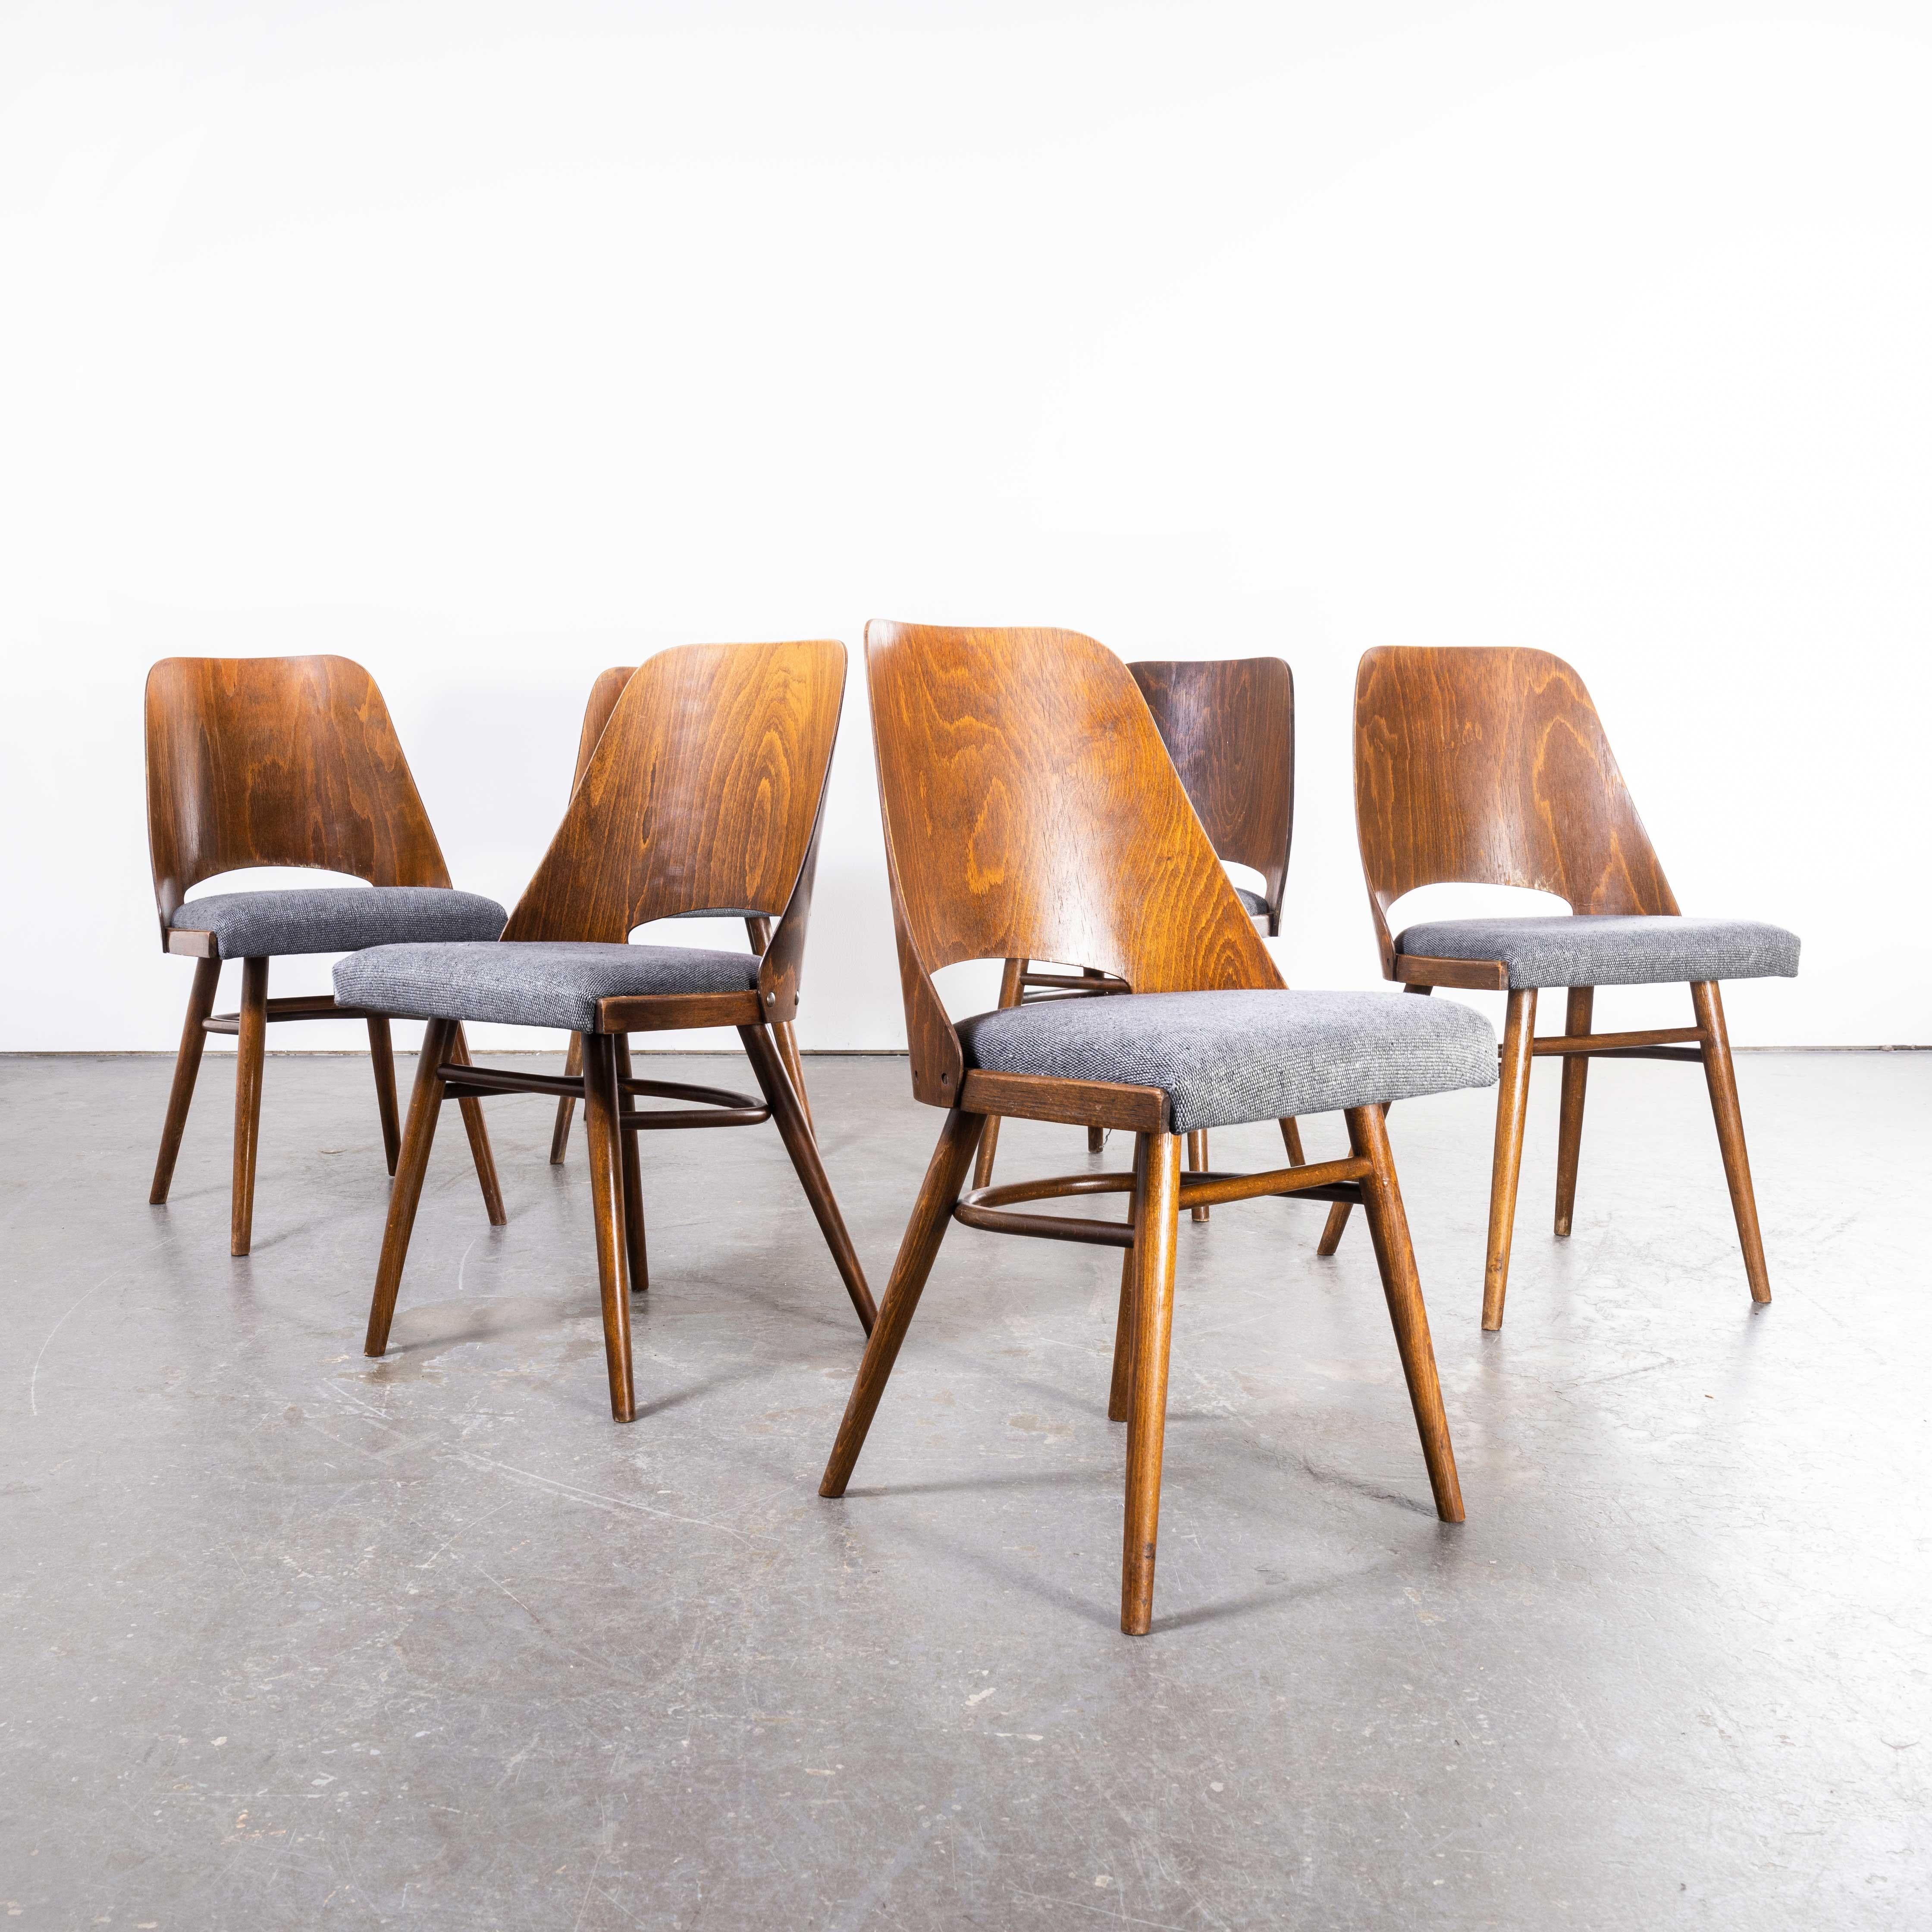 1950’s re -upholstered Thon dark walnut dining chairs by Radomir Hoffman – Set Of Six (1881)
1950’s re -upholstered Thon dark walnut dining chairs by Radomir Hoffman – Set Of Six (1881). These chairs were produced by the famous Czech firm Ton,